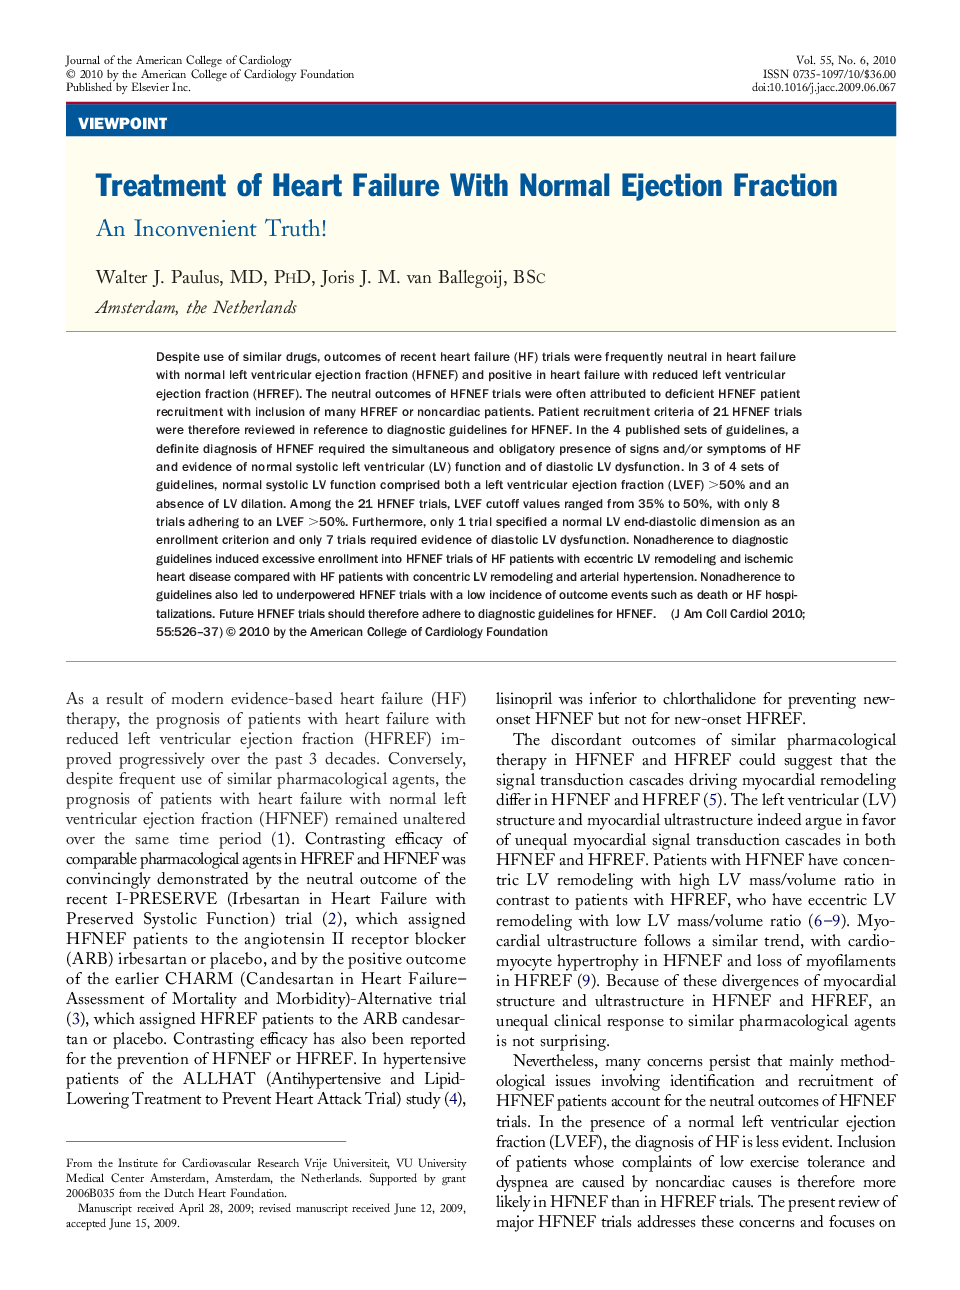 Treatment of Heart Failure With Normal Ejection Fraction : An Inconvenient Truth!